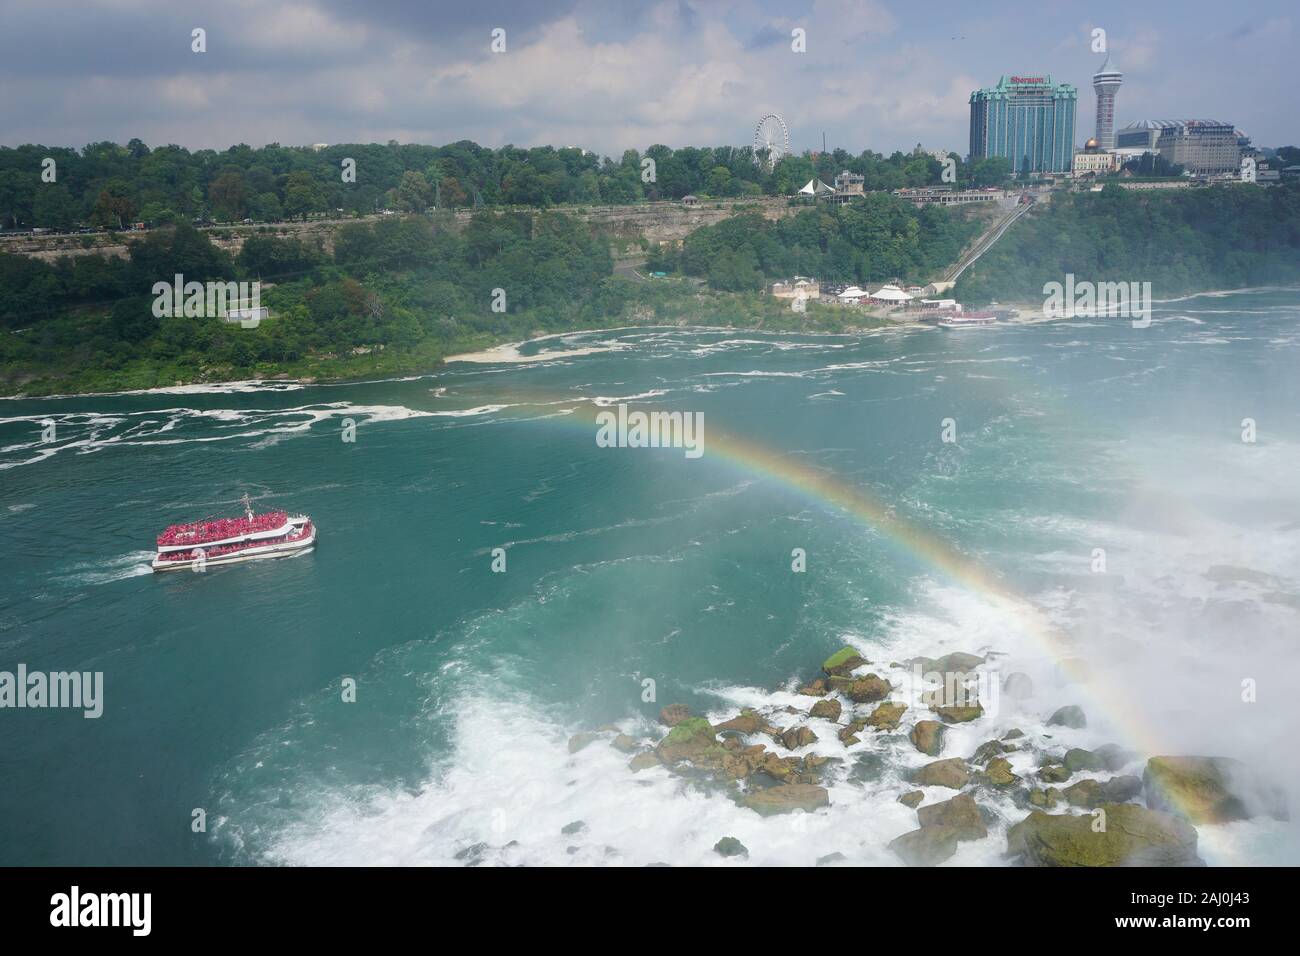 Niagara Falls, NY: A rainbow emerges from the mist as a tour boat sails through the Niagara Gorge. Stock Photo